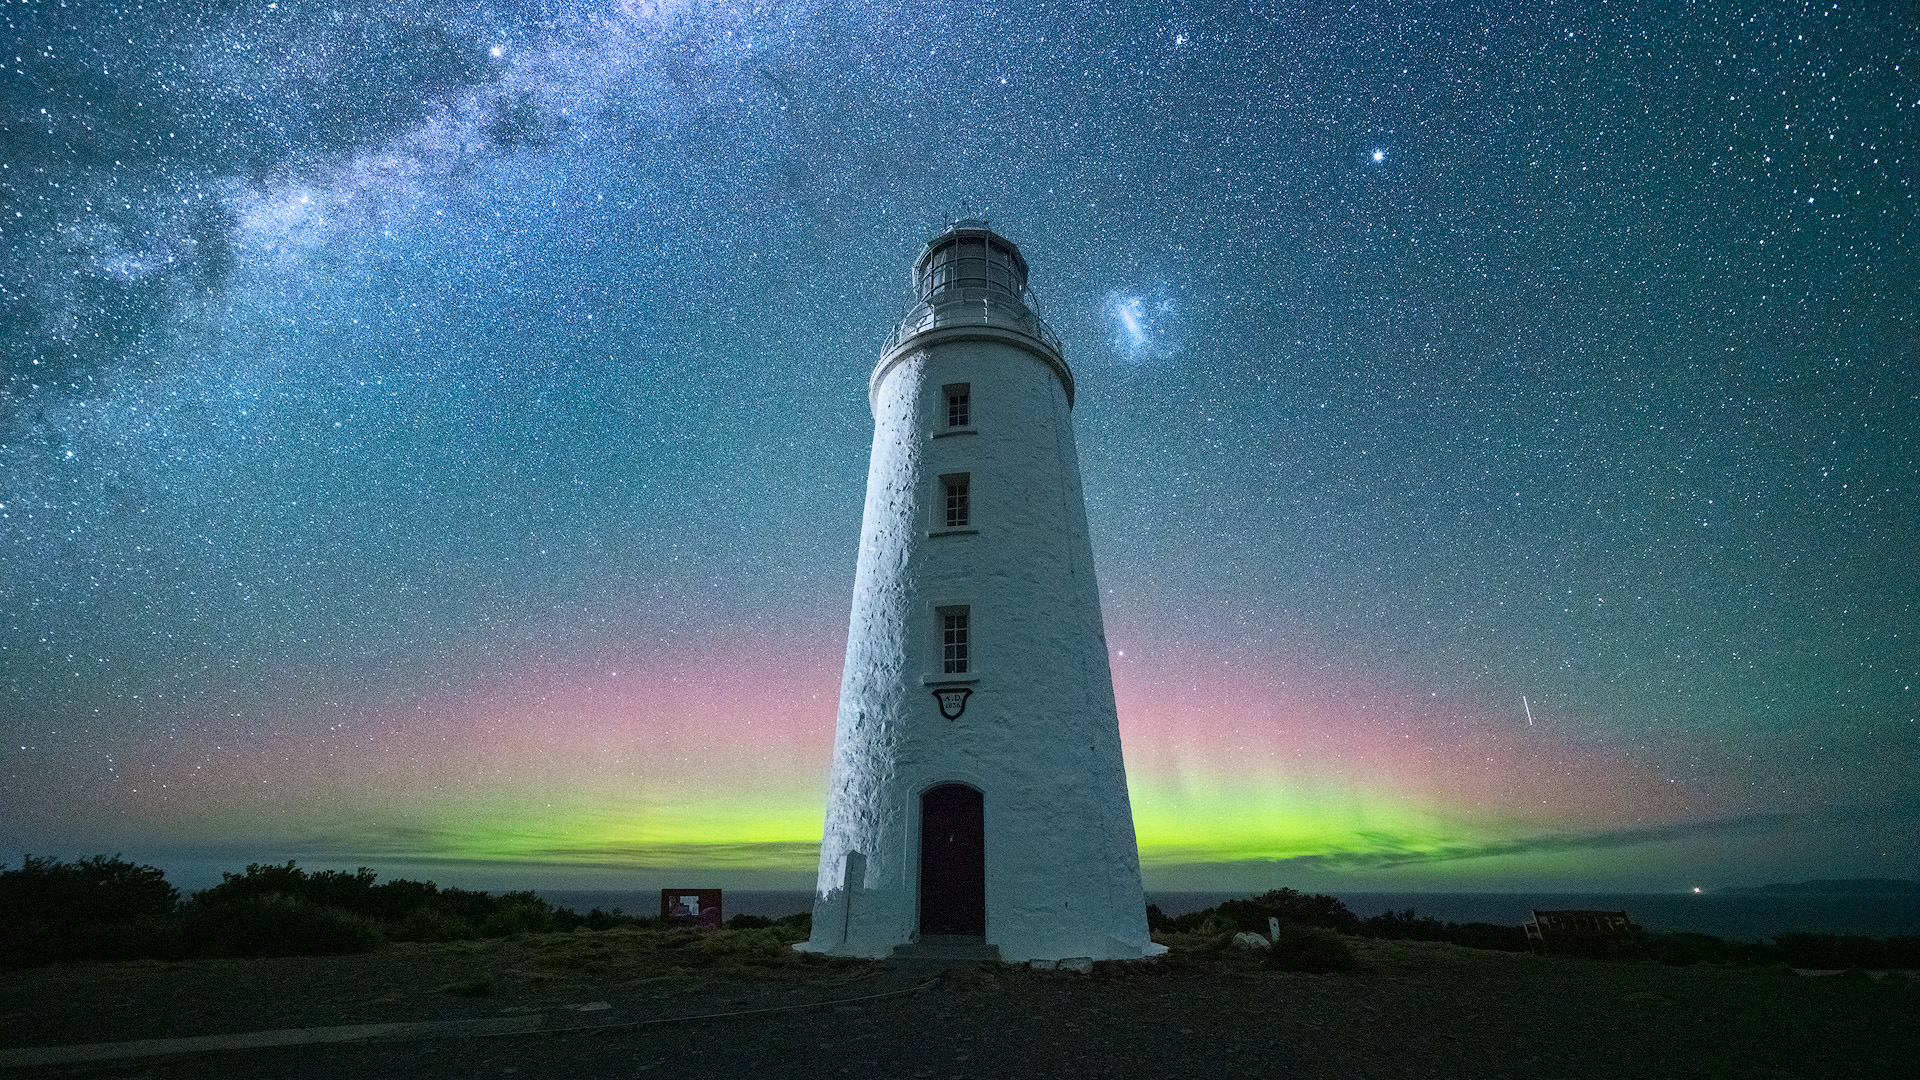 Picturesque image of Cape Bruny Lighthouse with the Aurora Australis illuminating the night sky green and pink.